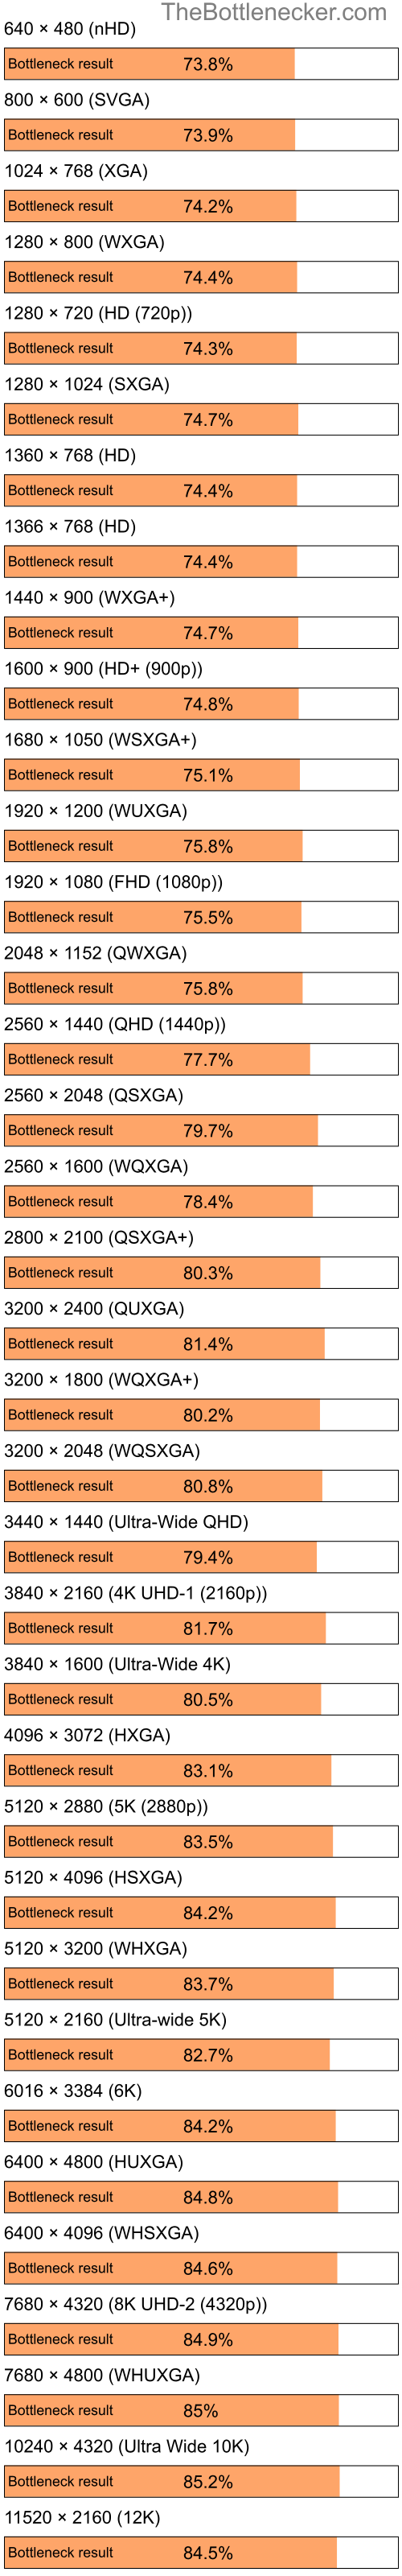 Bottleneck results by resolution for Intel Pentium 4 and NVIDIA Quadro NVS 110M in General Tasks